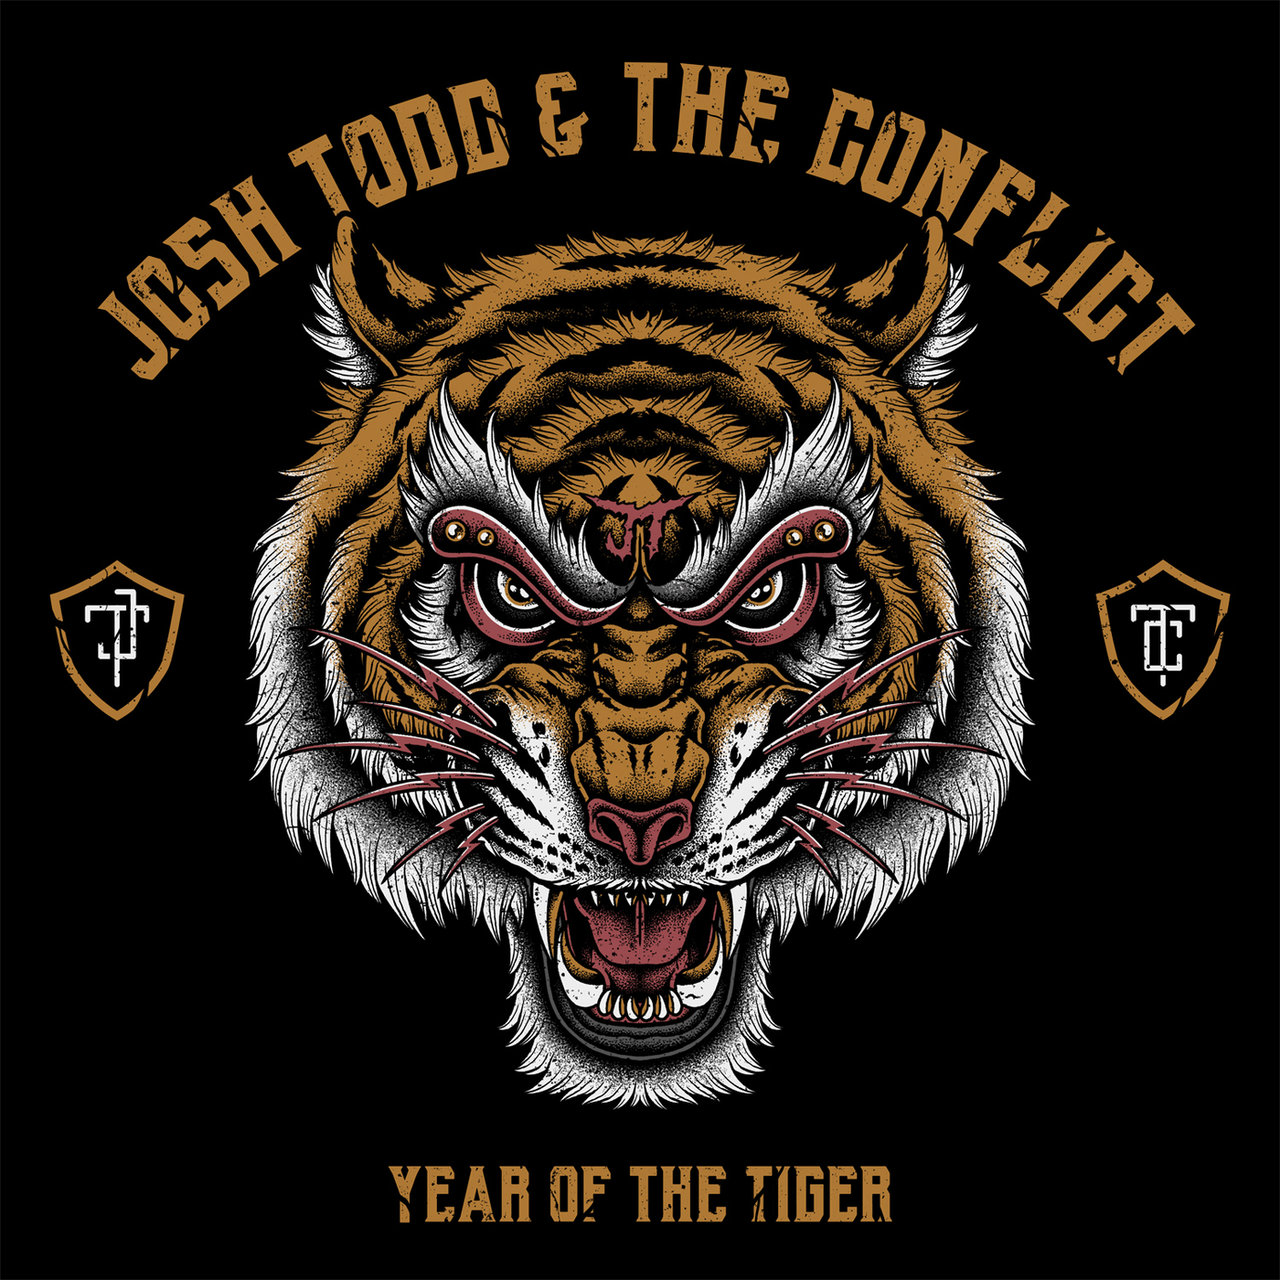 Josh Todd and The Conflict - Year Of The Tiger (2017) (Rock) (flac)